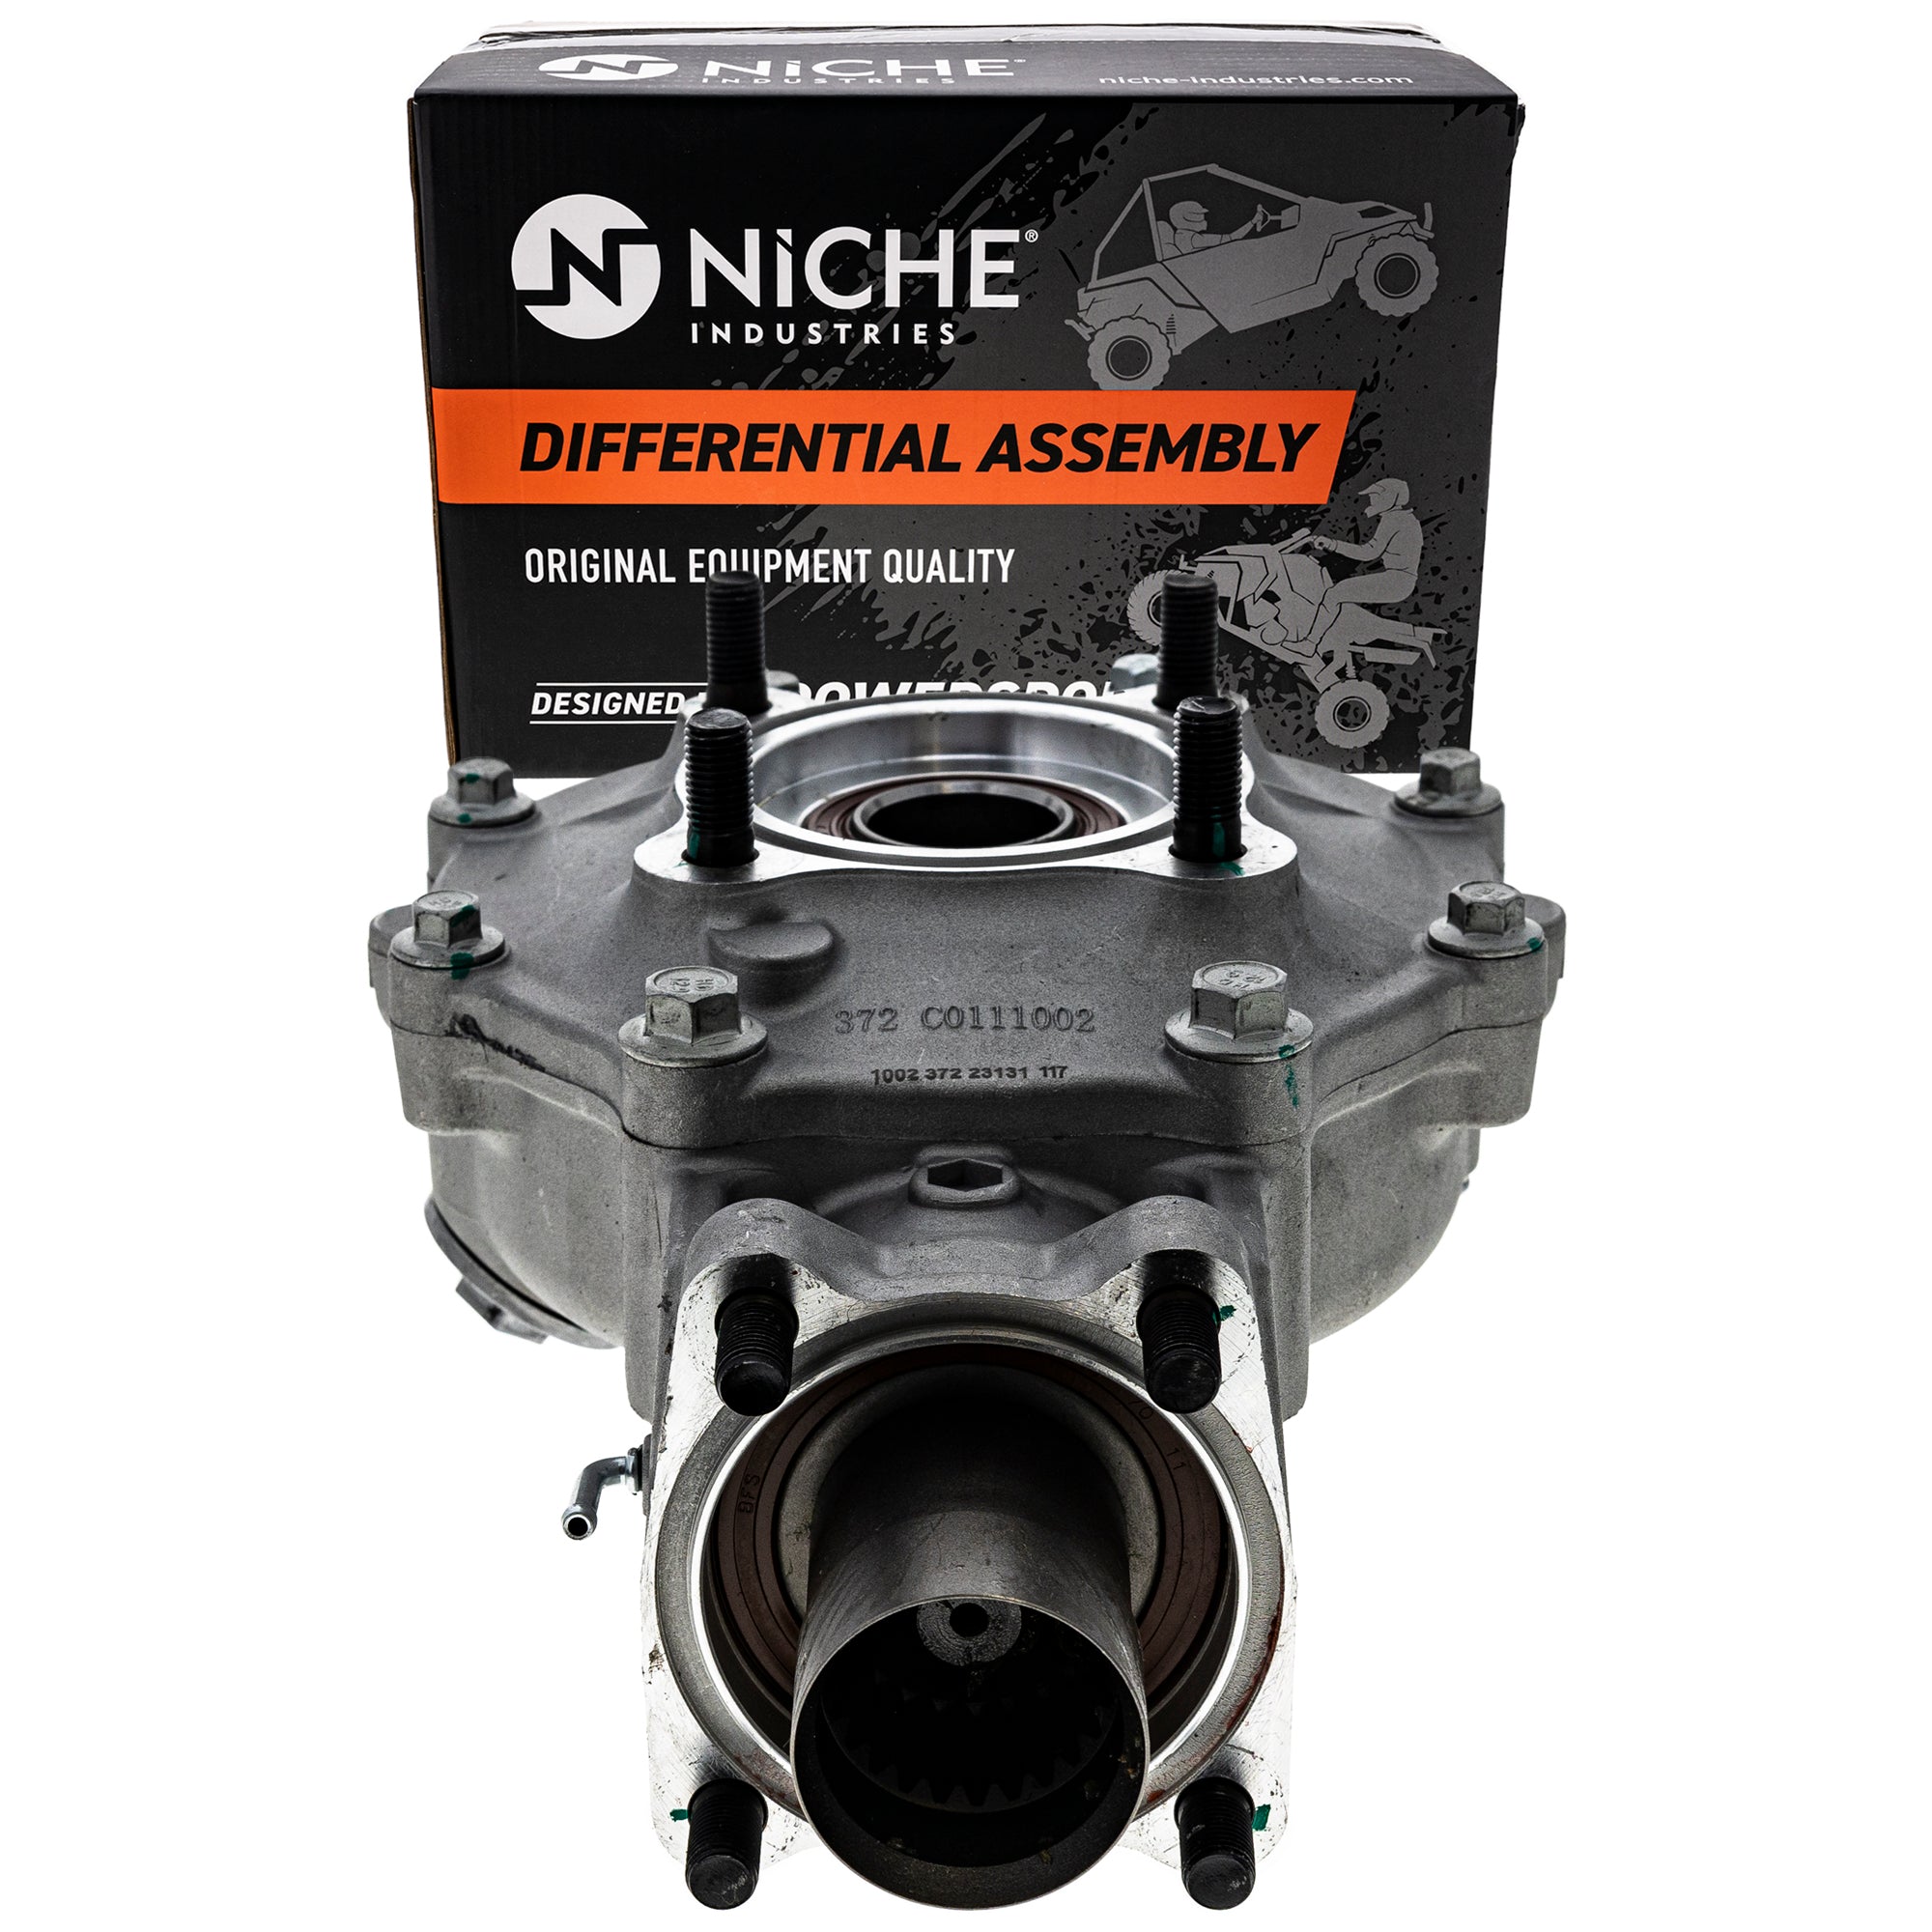 NICHE Rear Differential Assembly 41300-HP0-B80